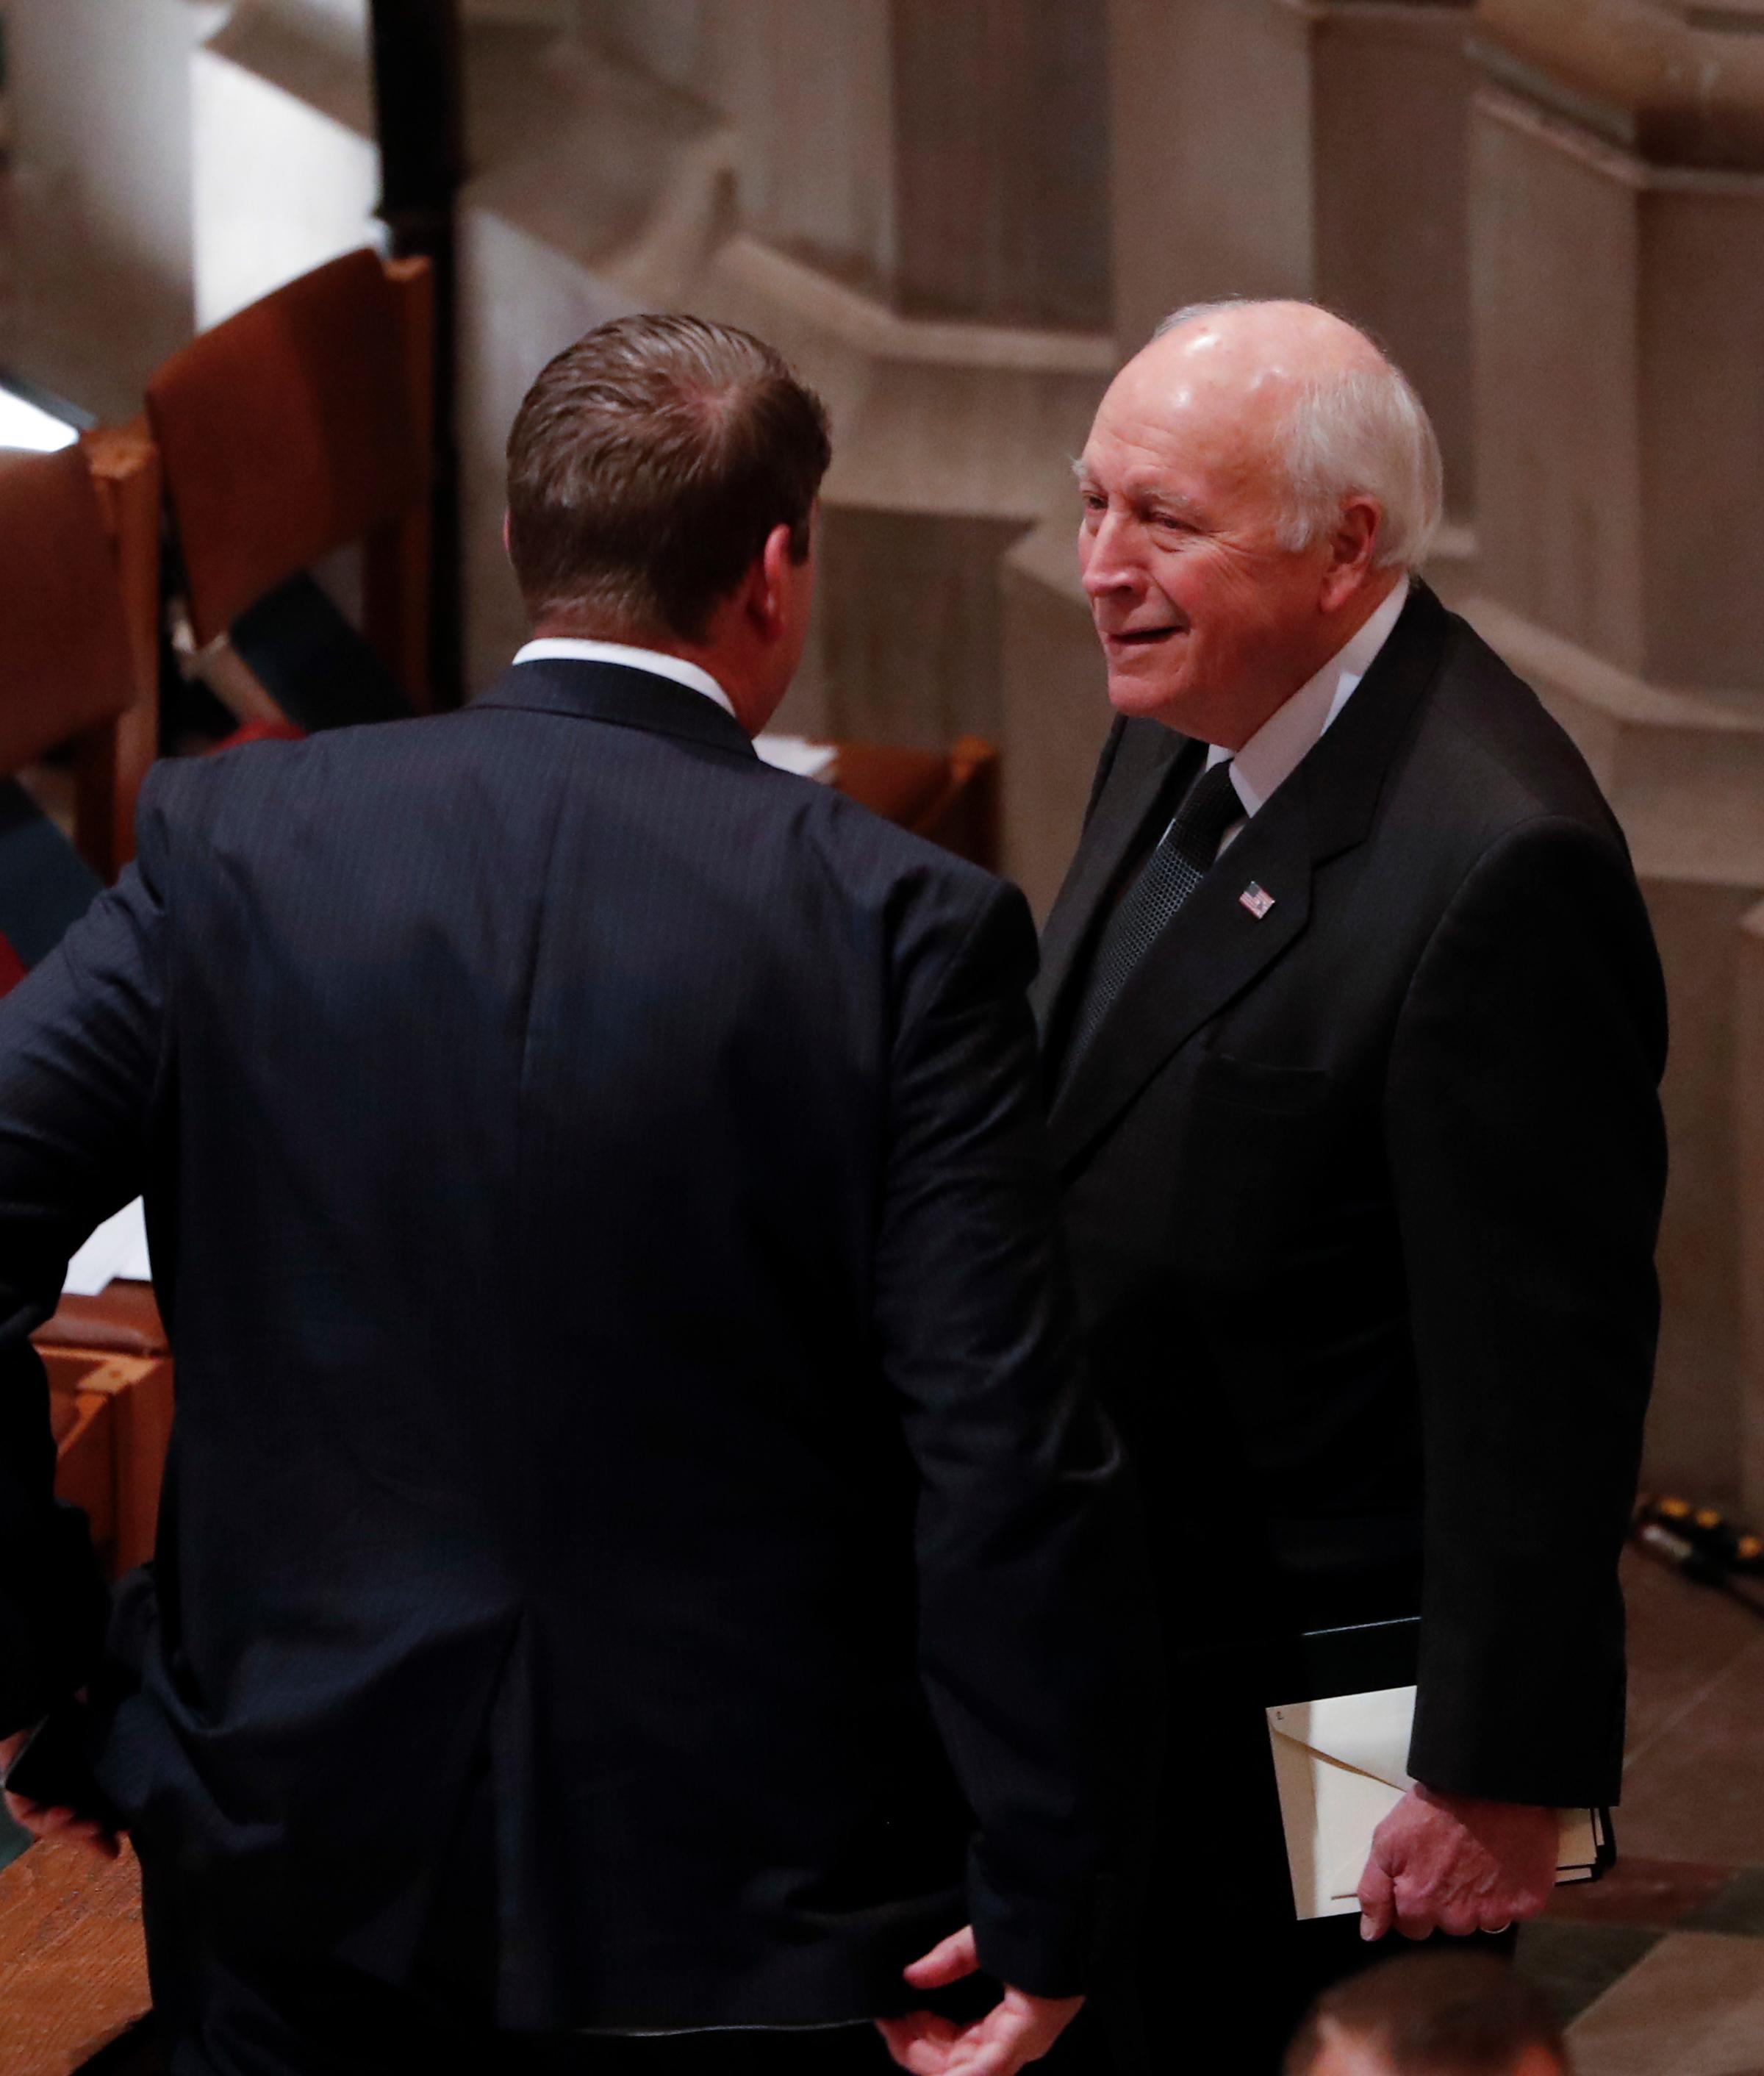 Former United States Vice President Dick Cheney arrives for the funeral services for former United States President George H. W. Bush at the National Cathedral